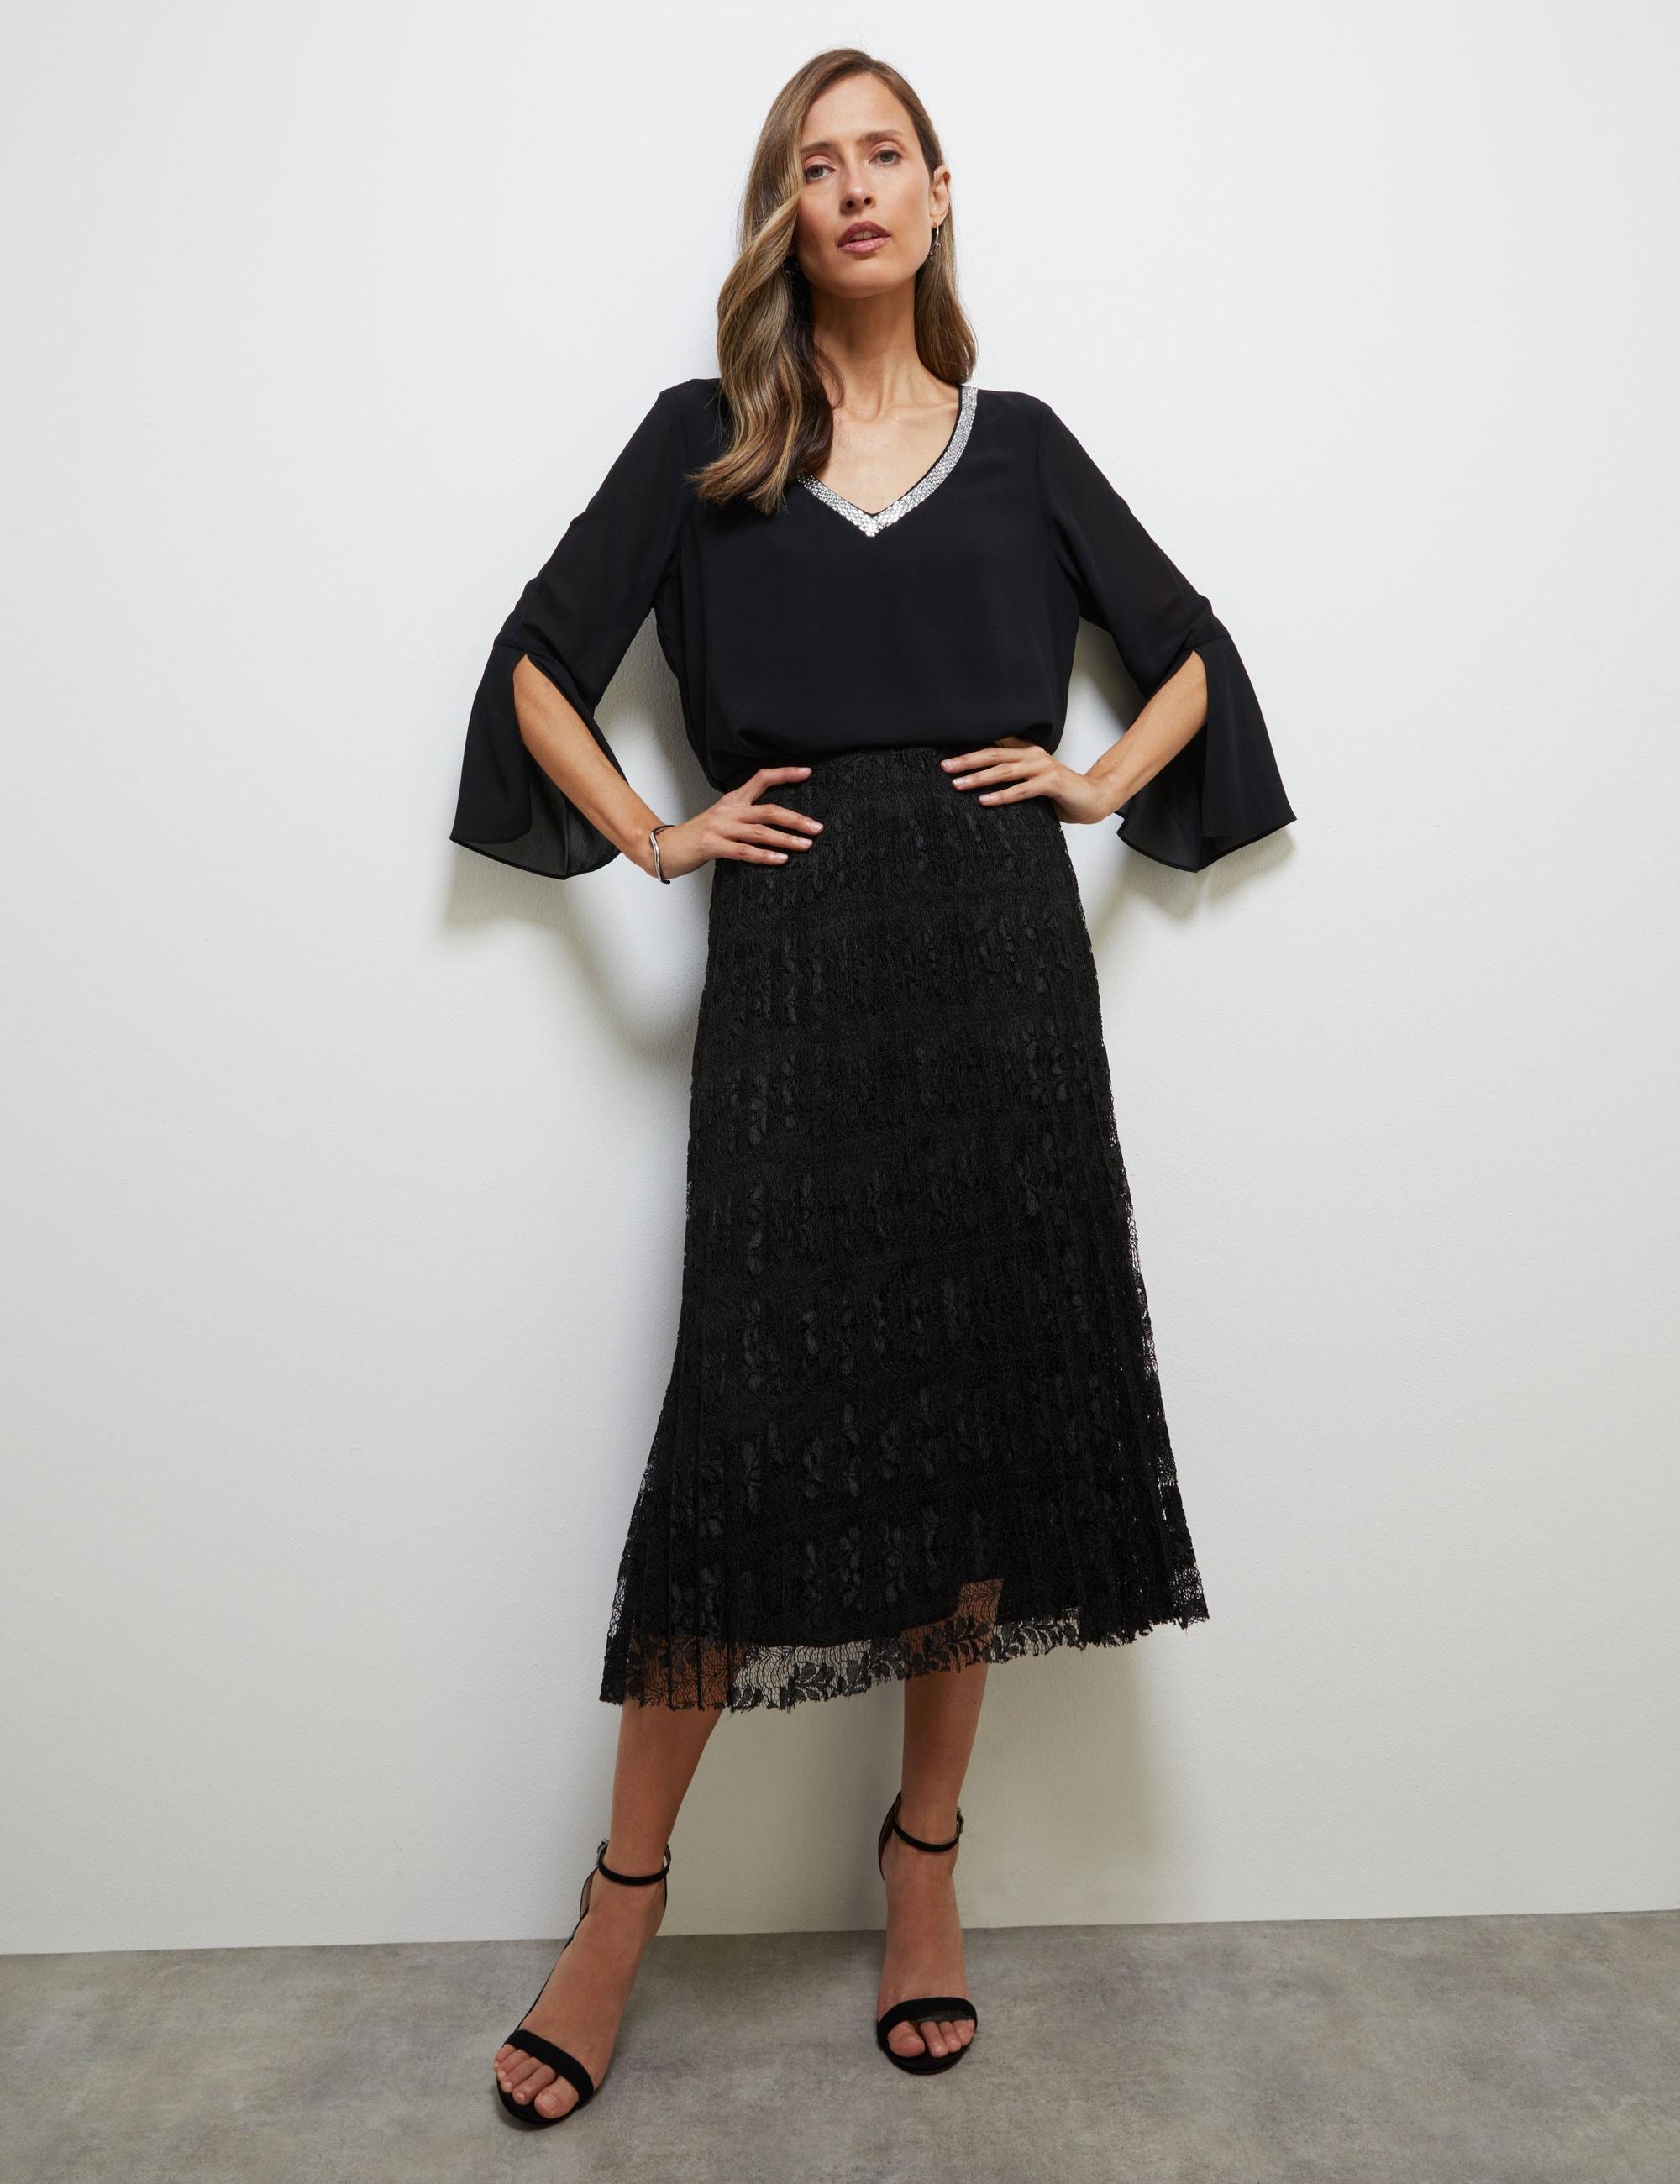 NONI B - Womens Skirts - Midi - Summer - Black - A Line - Smart Casual Fashion - Relaxed Fit - Pleated Lace - Knee Length - Work Clothes - Office Wear